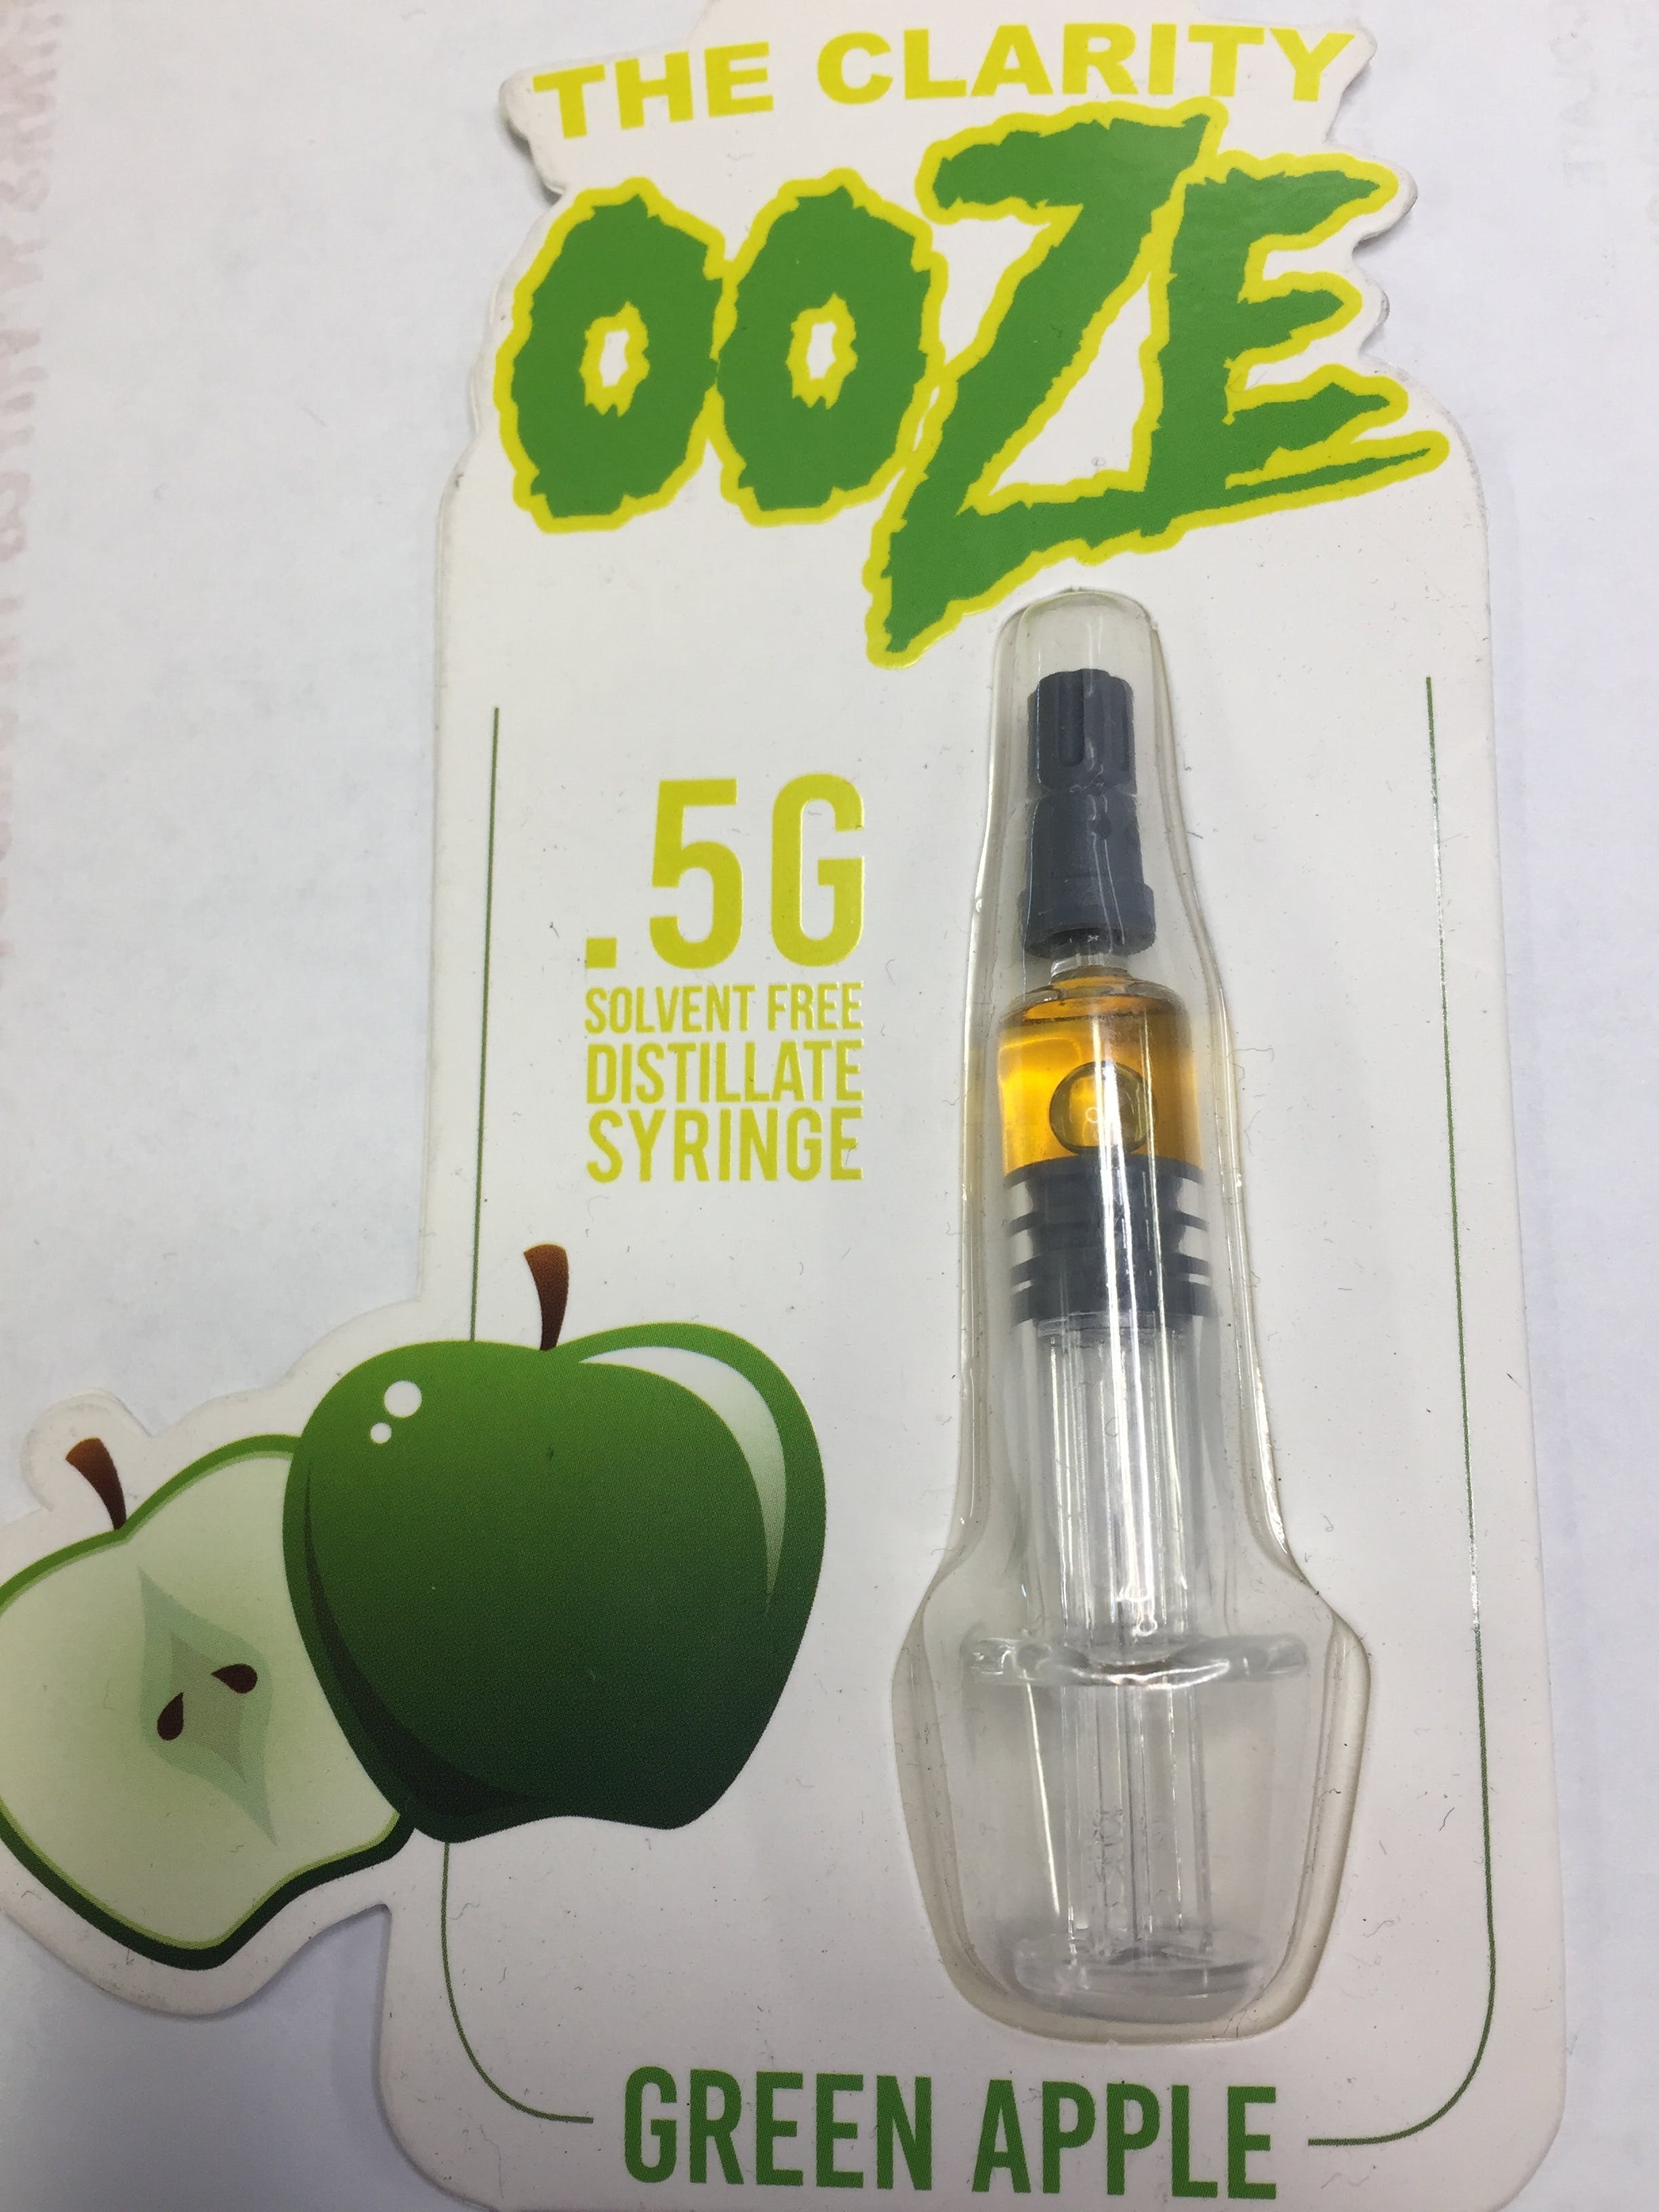 concentrate-the-clarity-ooze-green-apple-5g